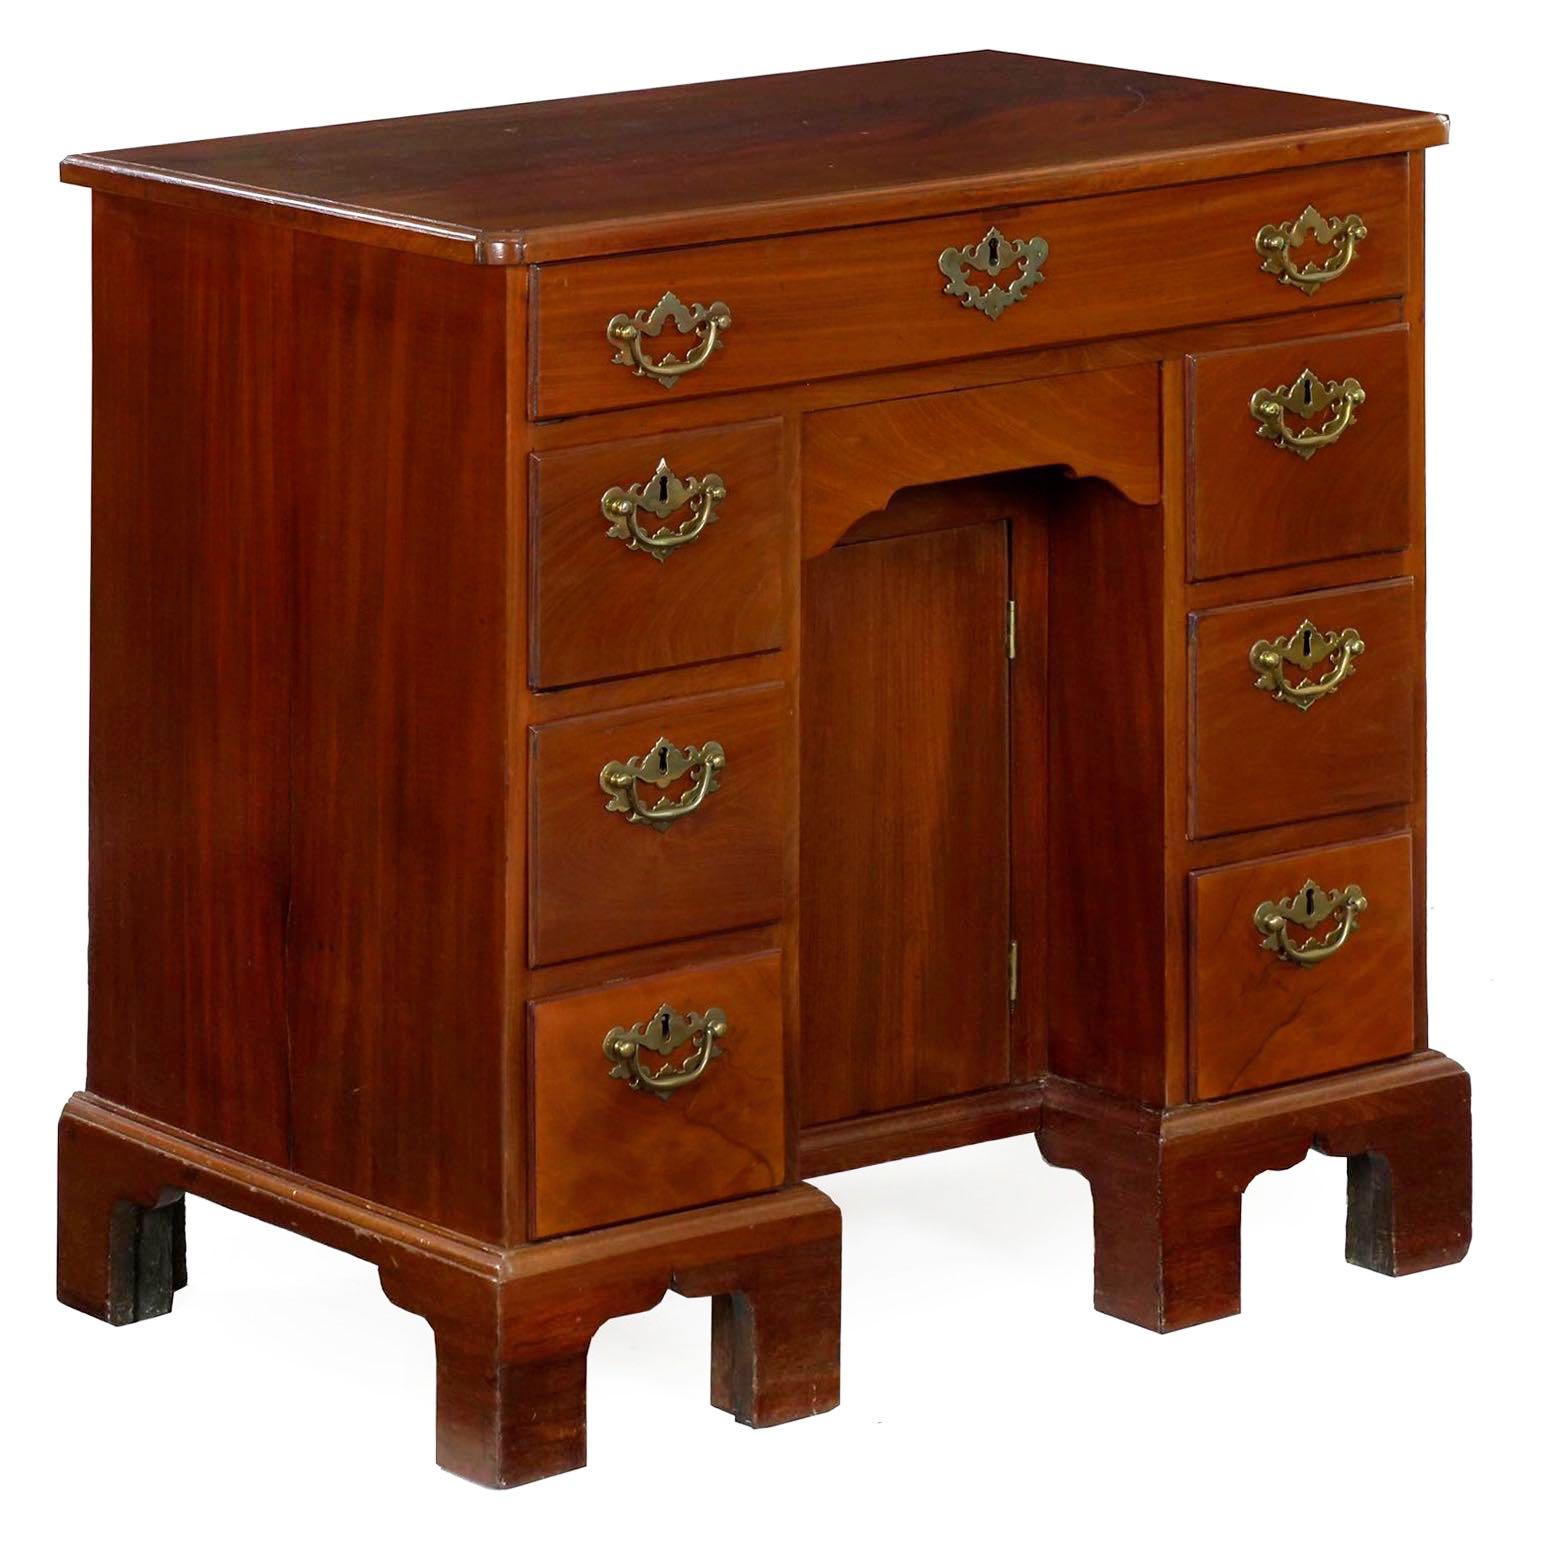 A very fine kneehole dressing-table of the George II period, the proportions are very handsome, allowing it to be a functional strike point in the bedroom without overwhelming the setting. The aesthetic is typical of the period, tidy and neat angles